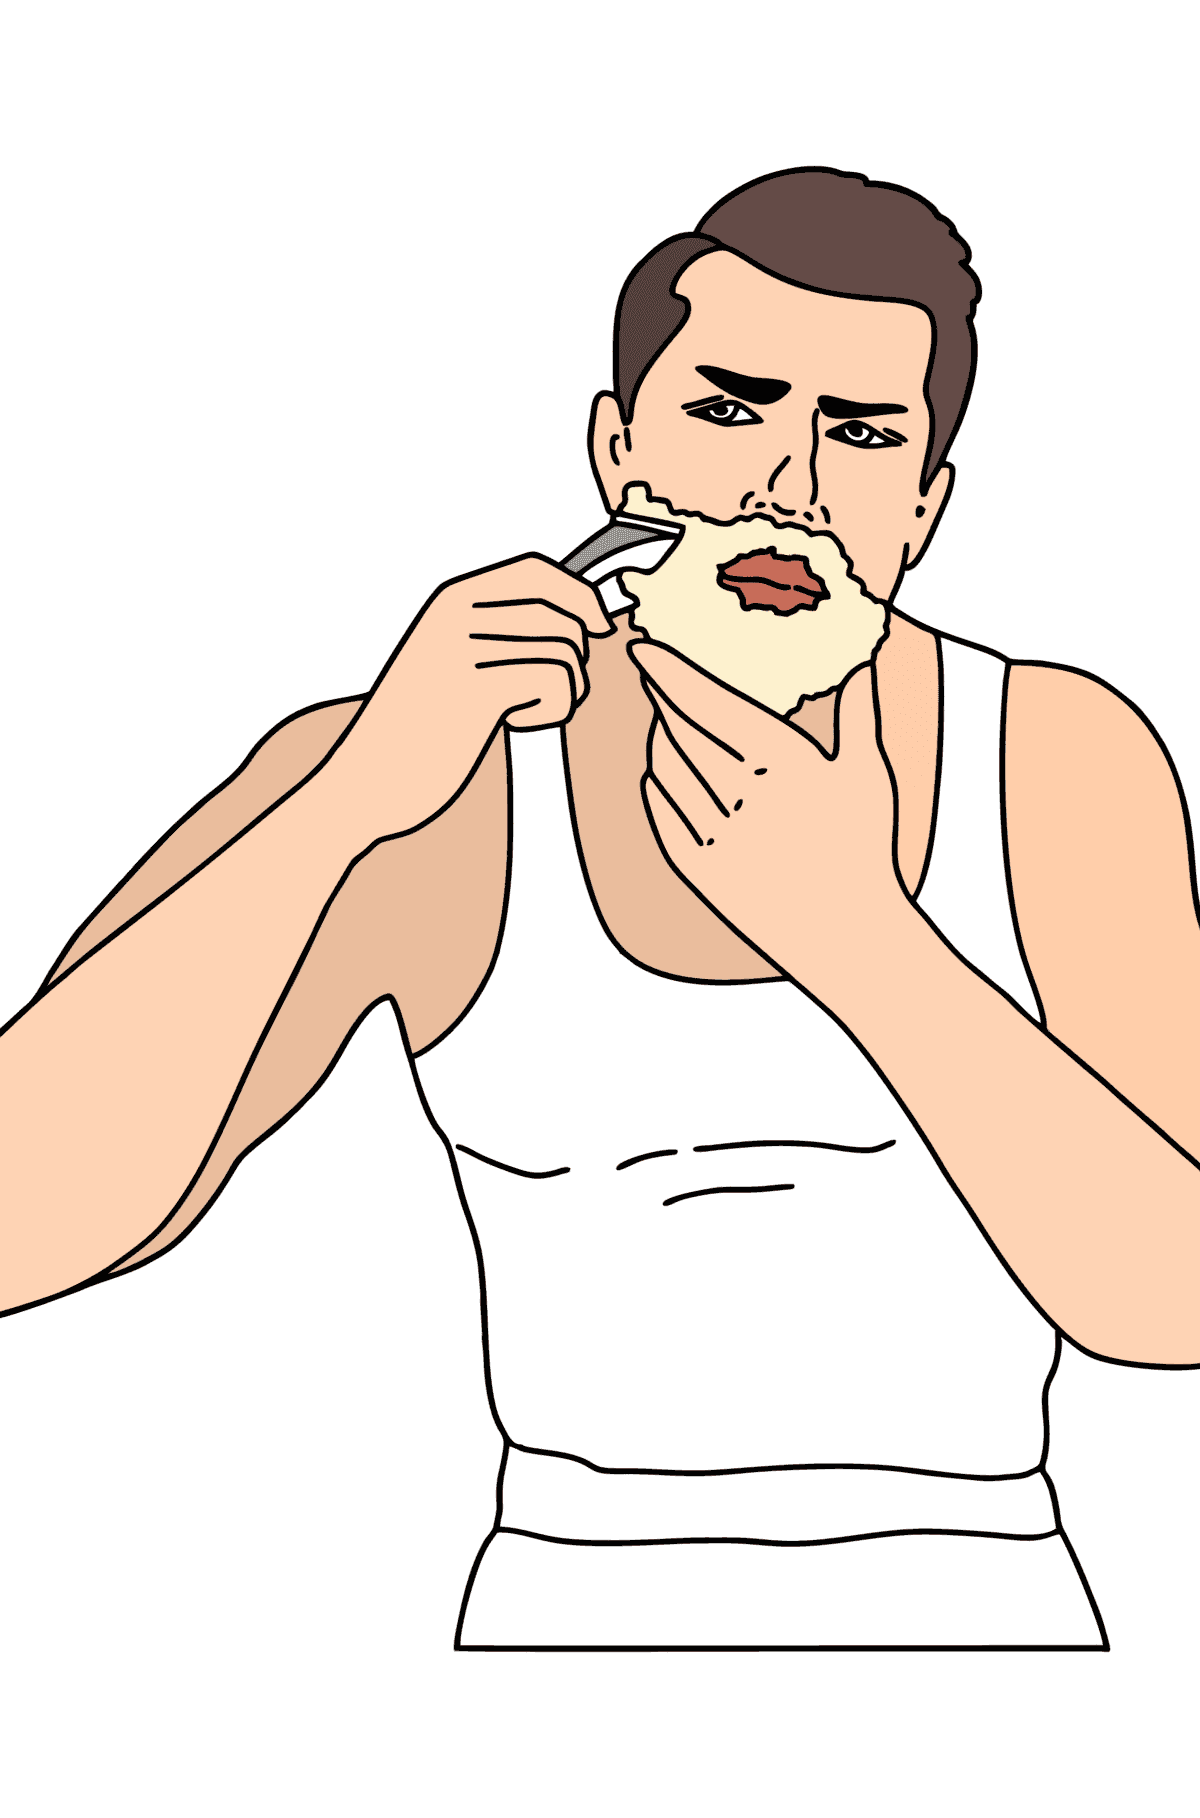 Man shaves сoloring page - Coloring Pages for Kids